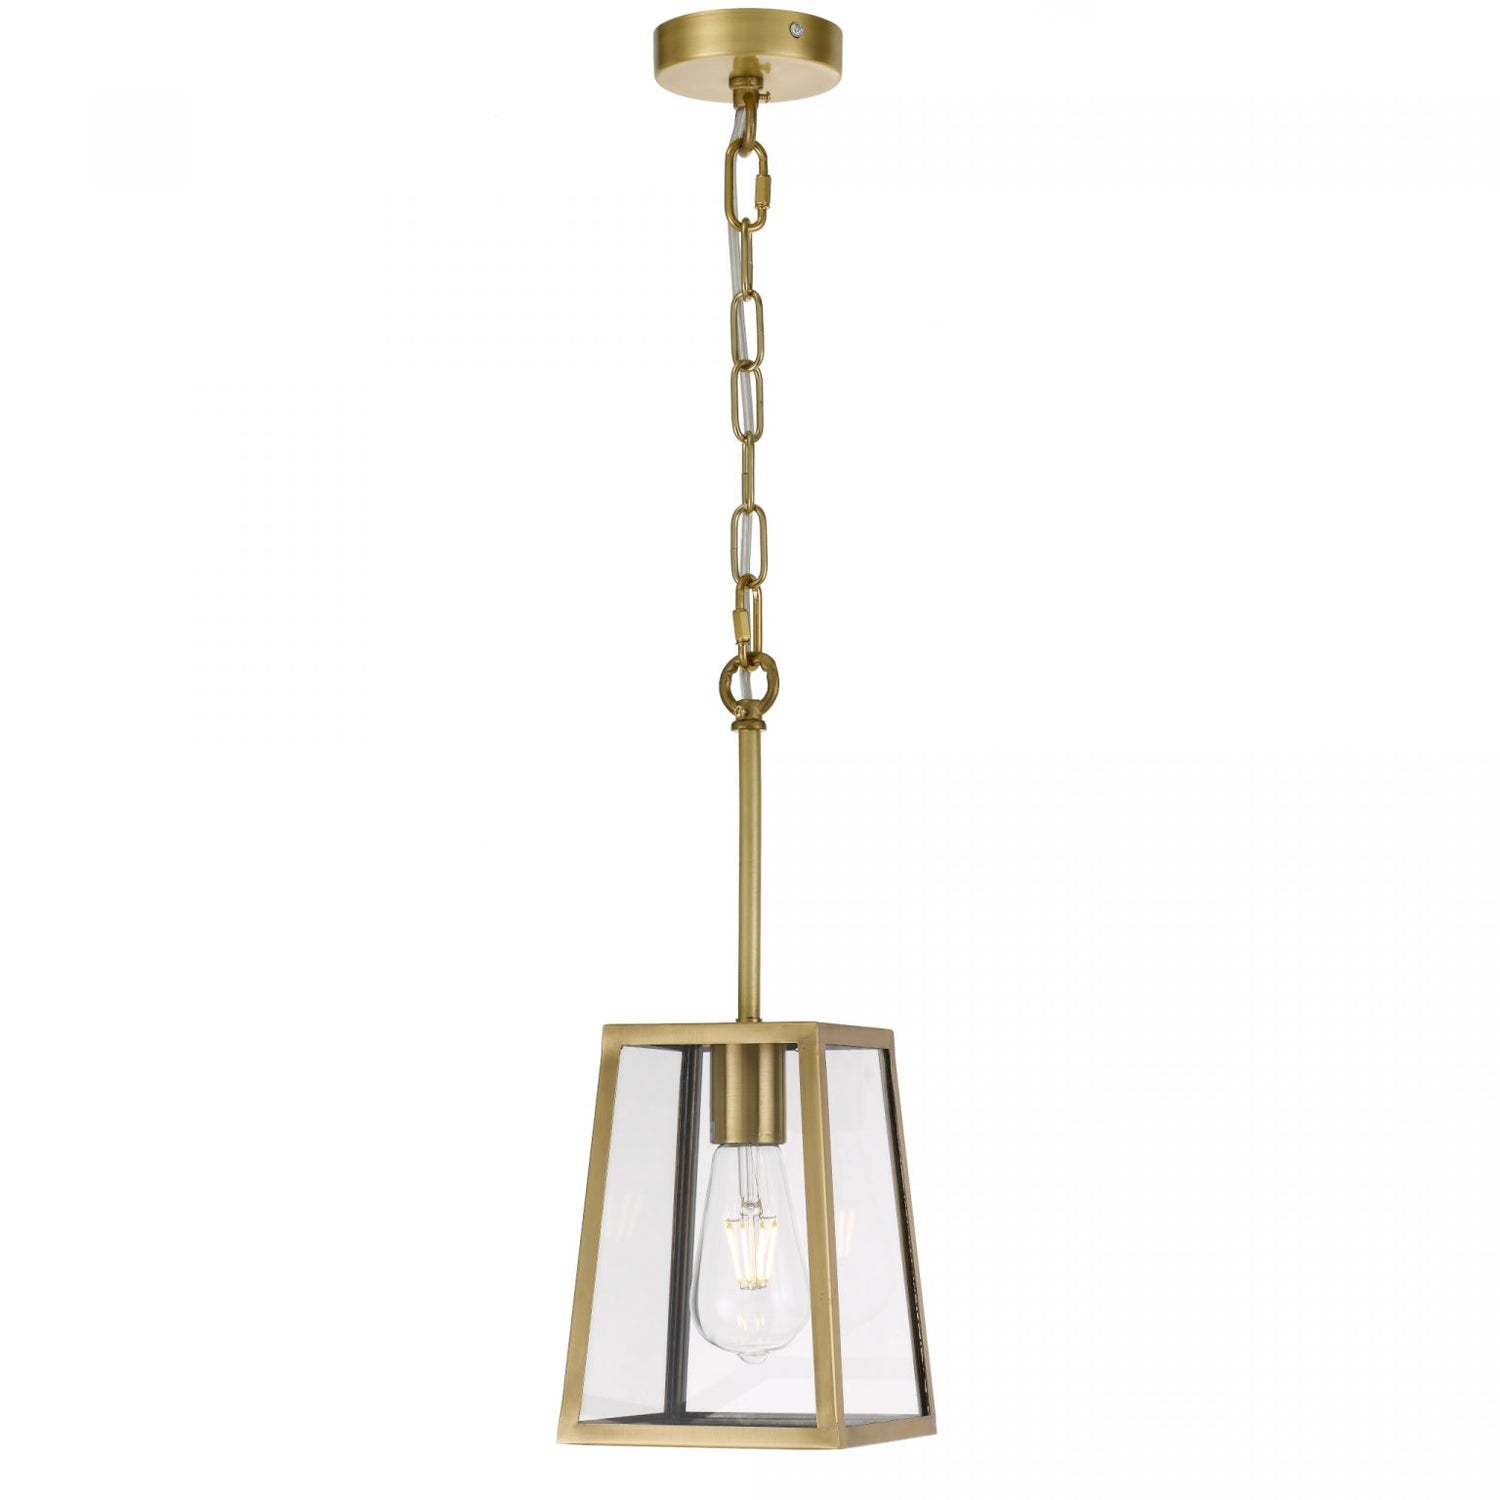 Cantena 15cm Pendant Antique Brass with Clear Glass Panel Lantern